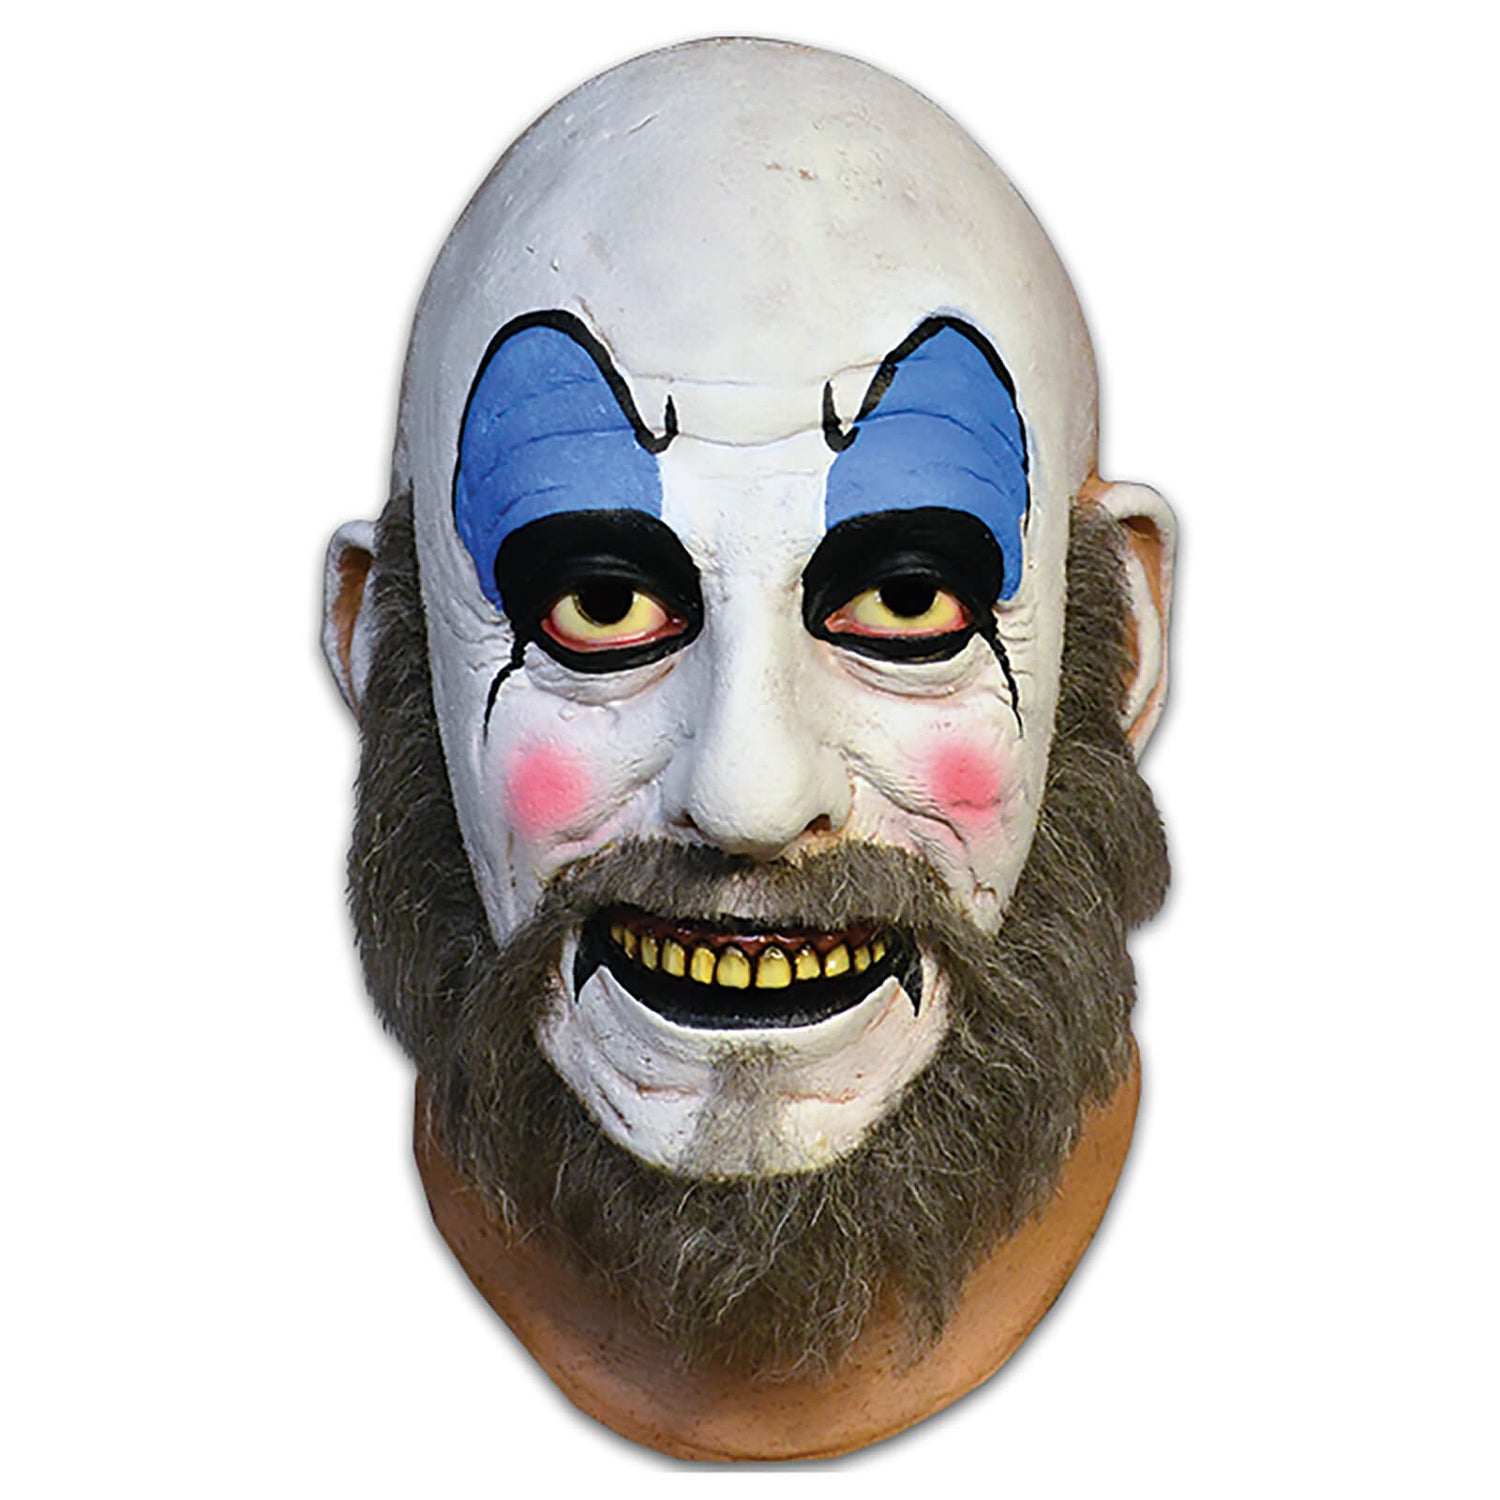 Trick or Treat House Of 1000 Corpses Captain Spaulding Mask